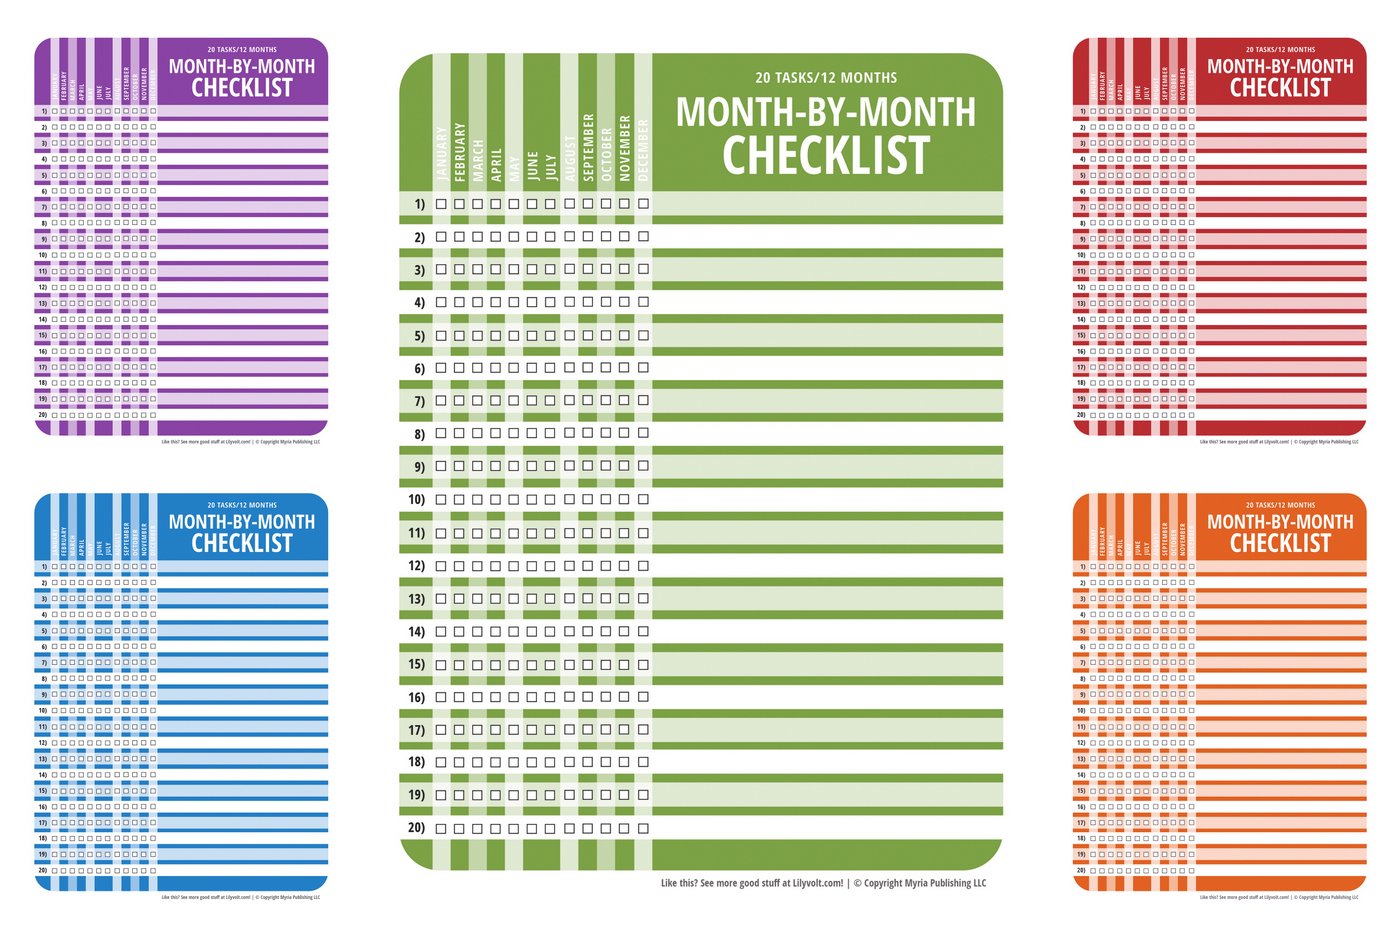 Month-by-month printable planning checklists